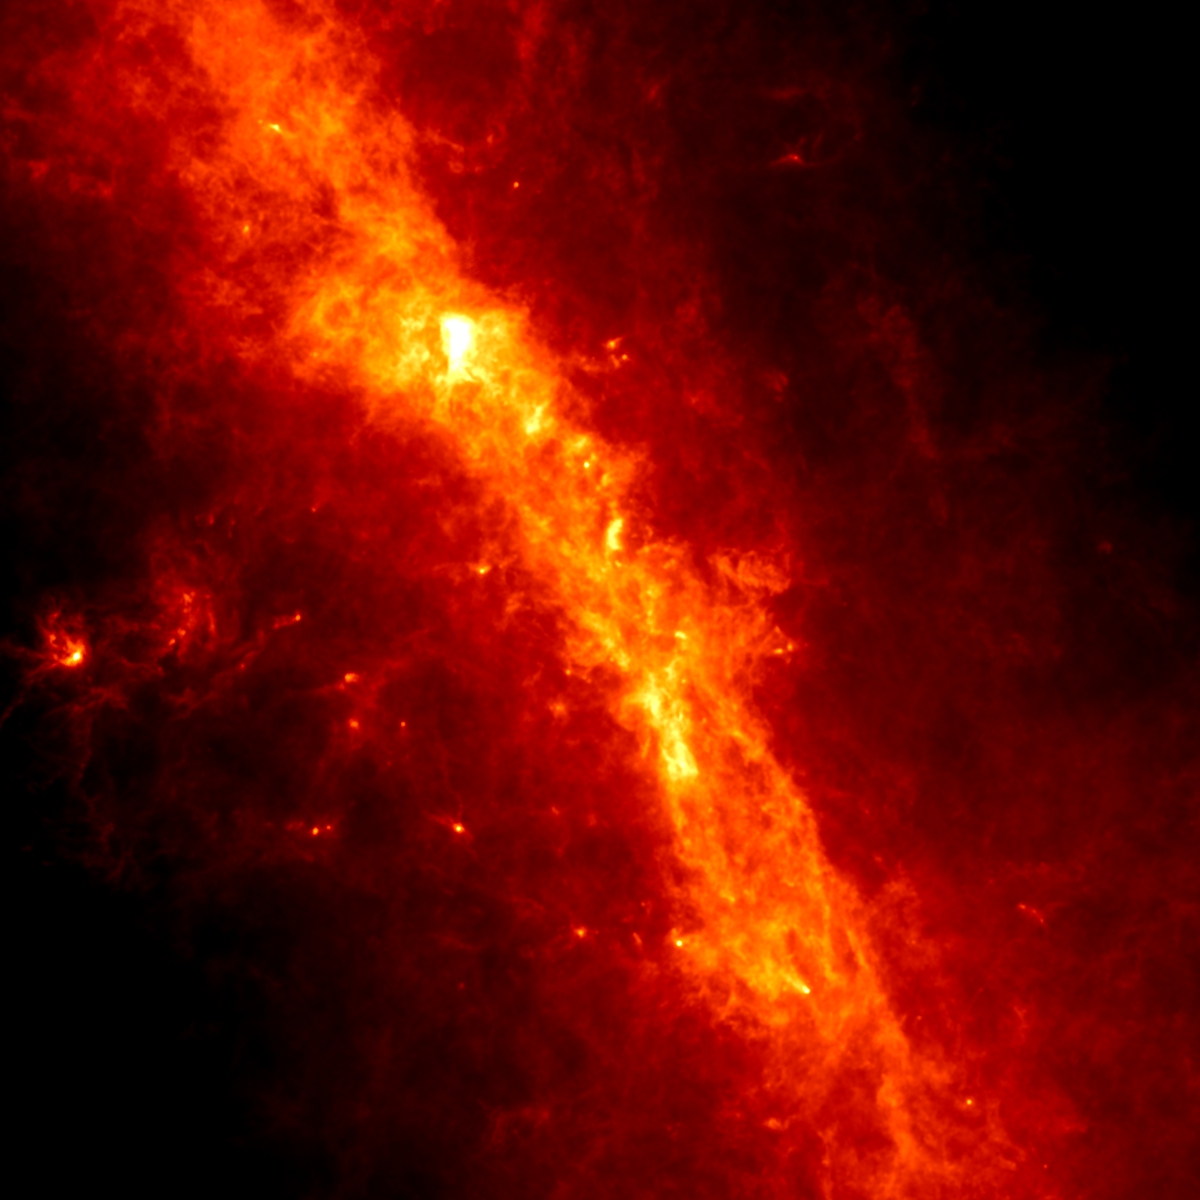 Sgr A* and Sgr B2 as seen in the far-infrared